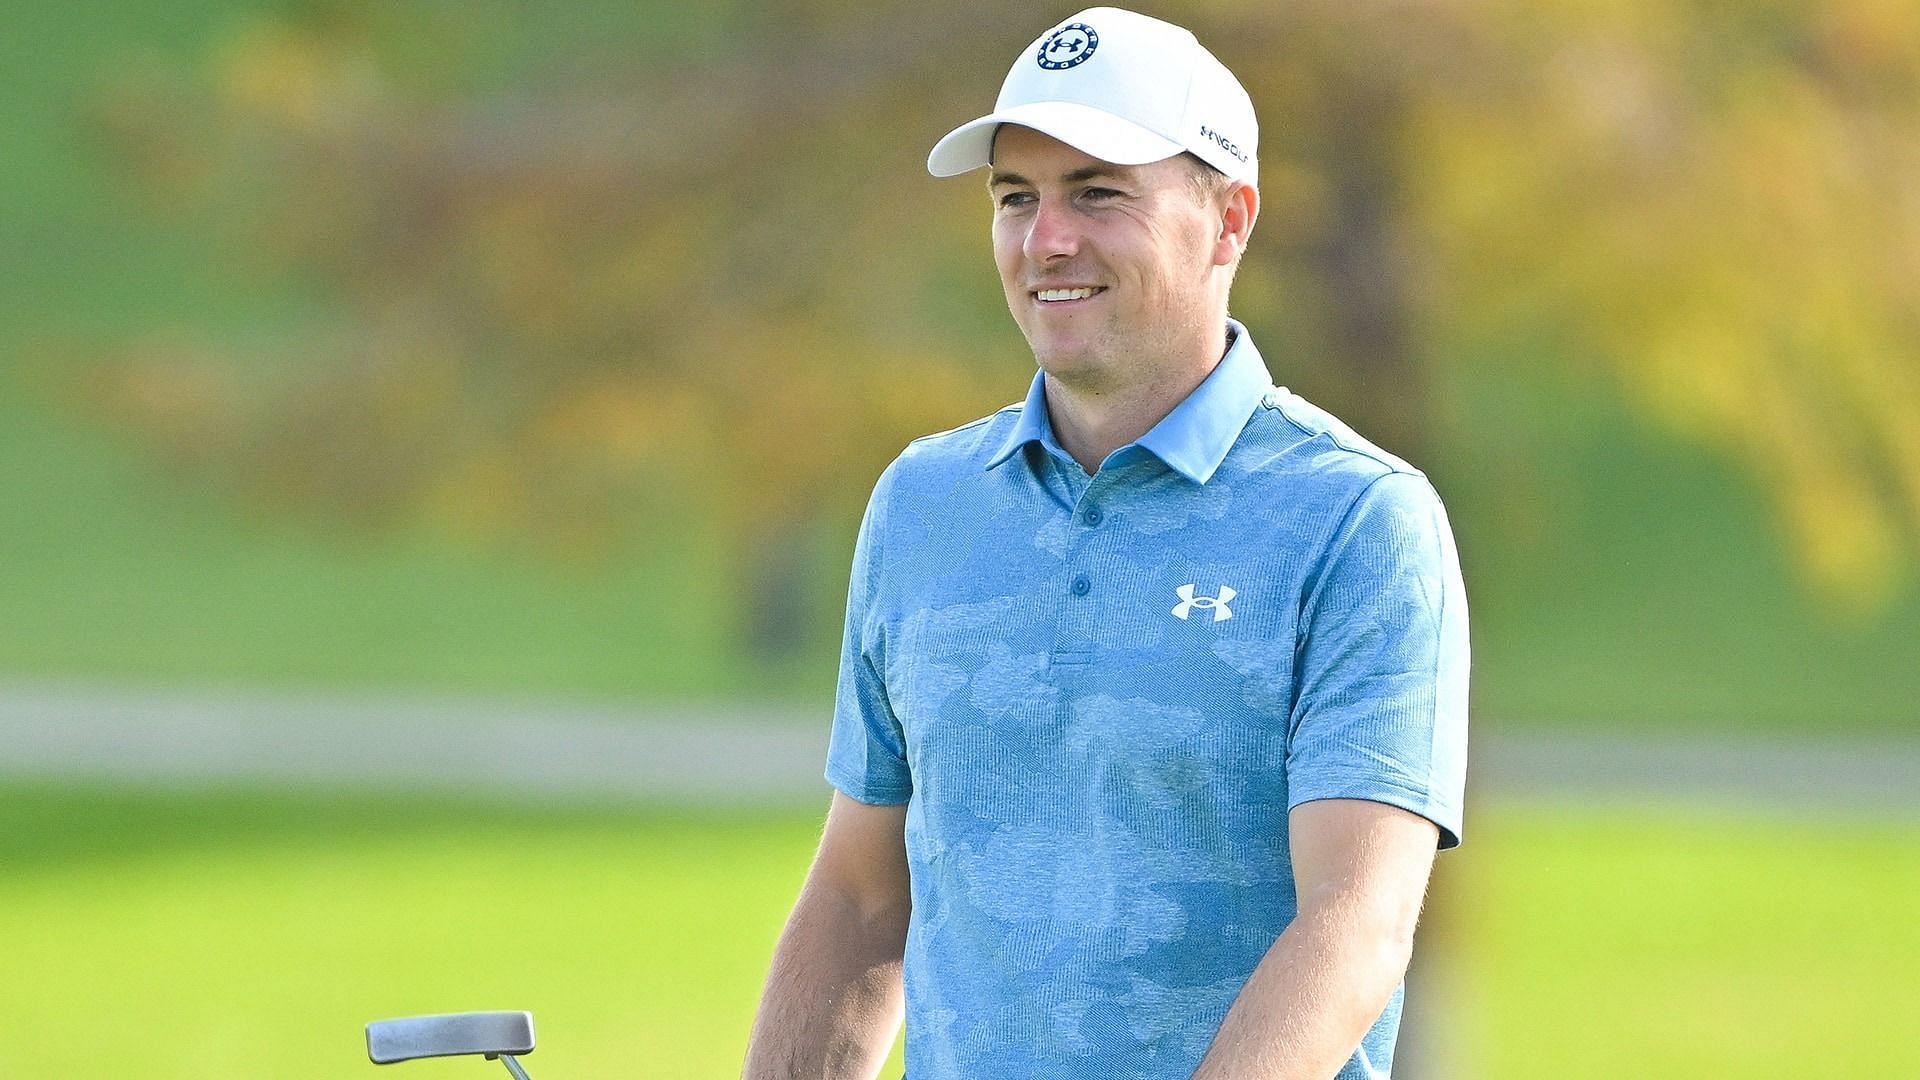 Spieth is in Hawaii for the Sony Open